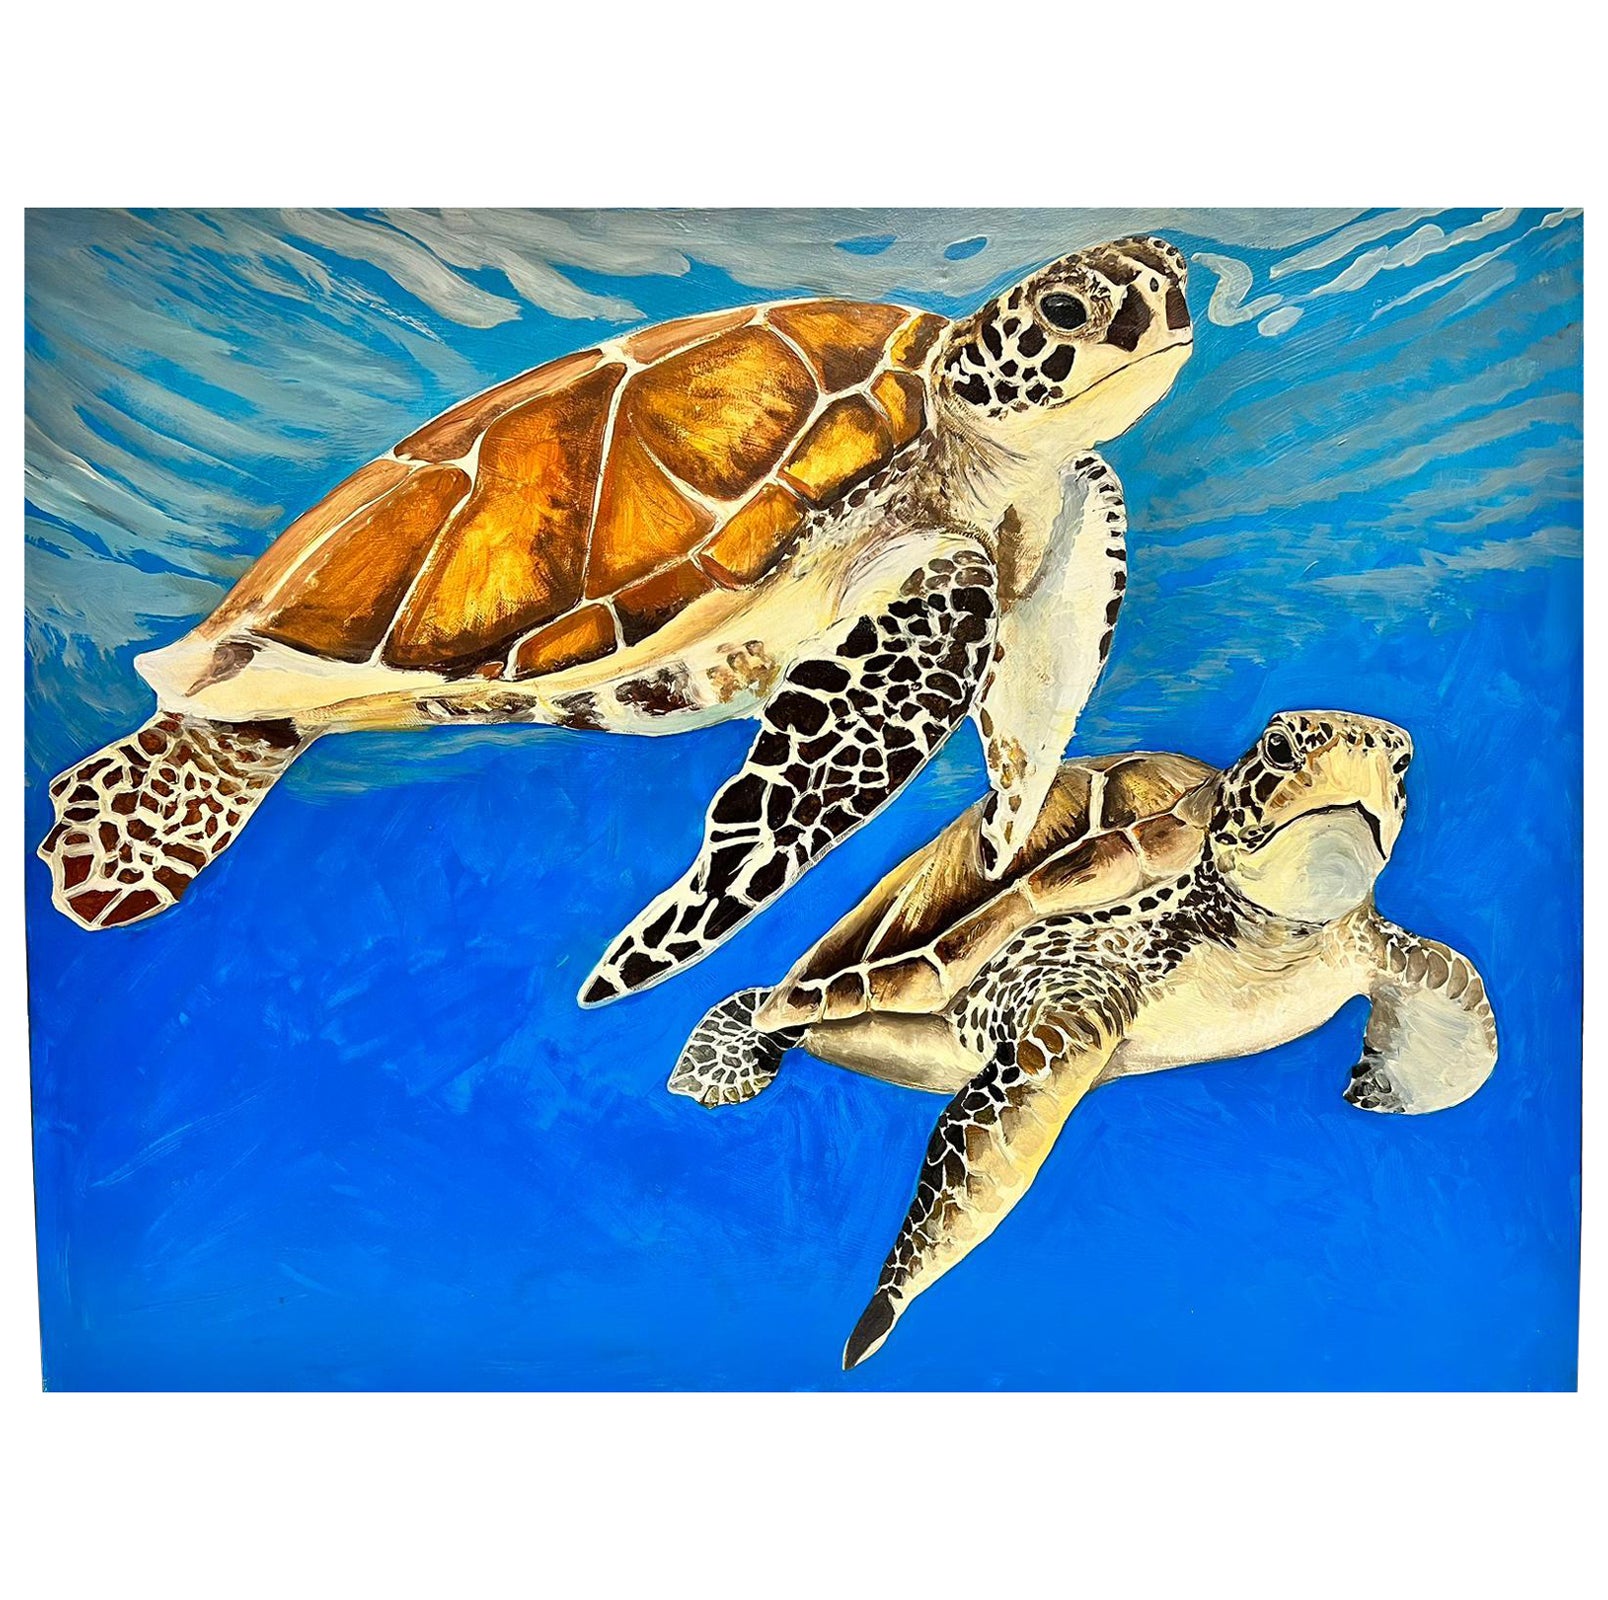 British contemporary Landscape Painting - Sea Turtles Swimming in Blue Sea Large Contemporary British Painting on Canvas